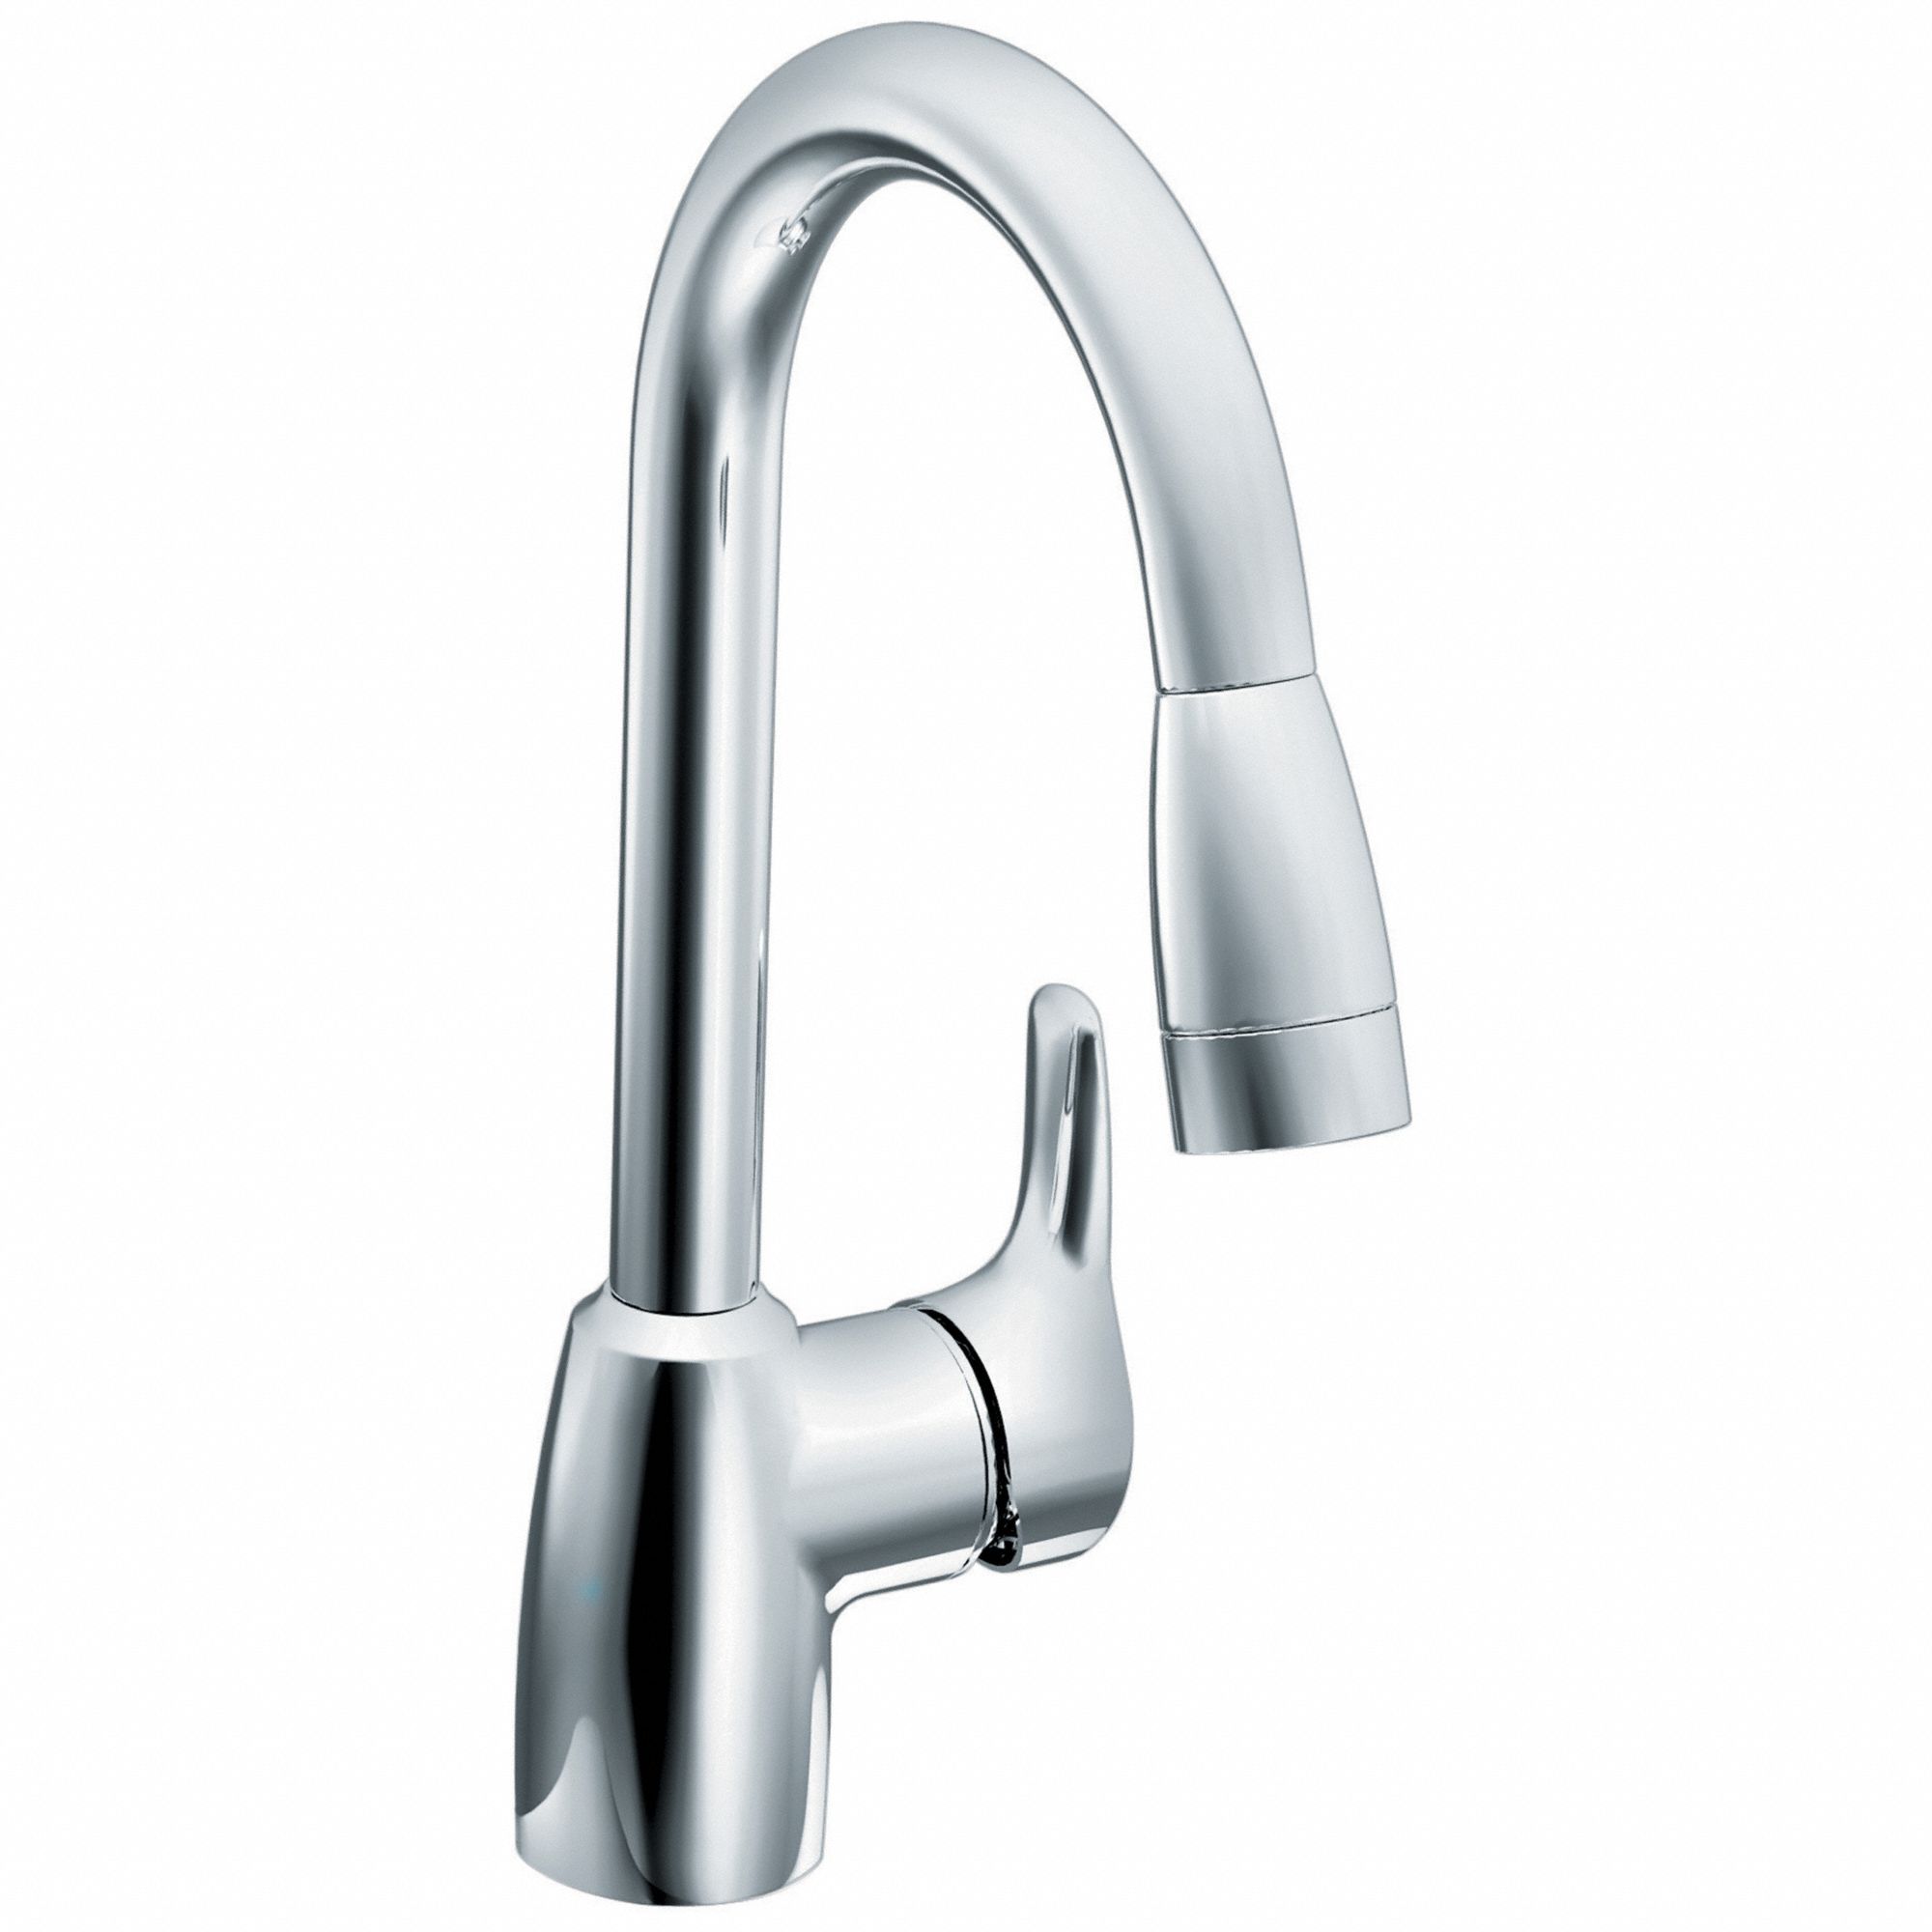 Kitchen Faucet: Baystone™, CA42519, Chrome Finish, 1.5 gpm Flow Rate, Drrain Not Included Drain